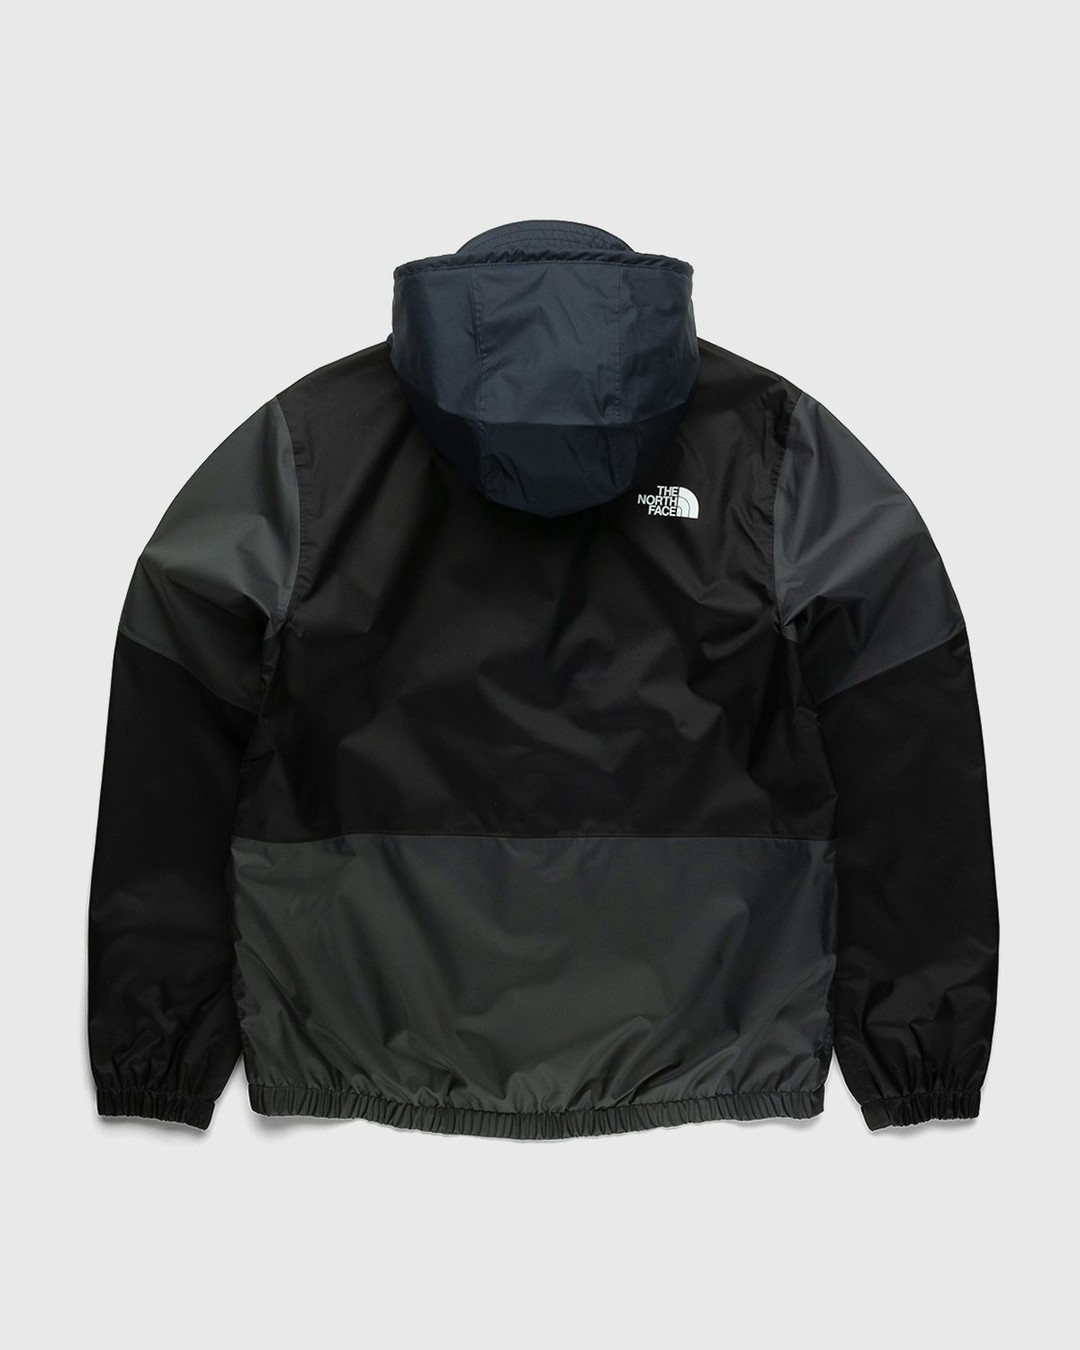 The North Face – Farside Jacket Aviator Navy - Outerwear - Blue - Image 2